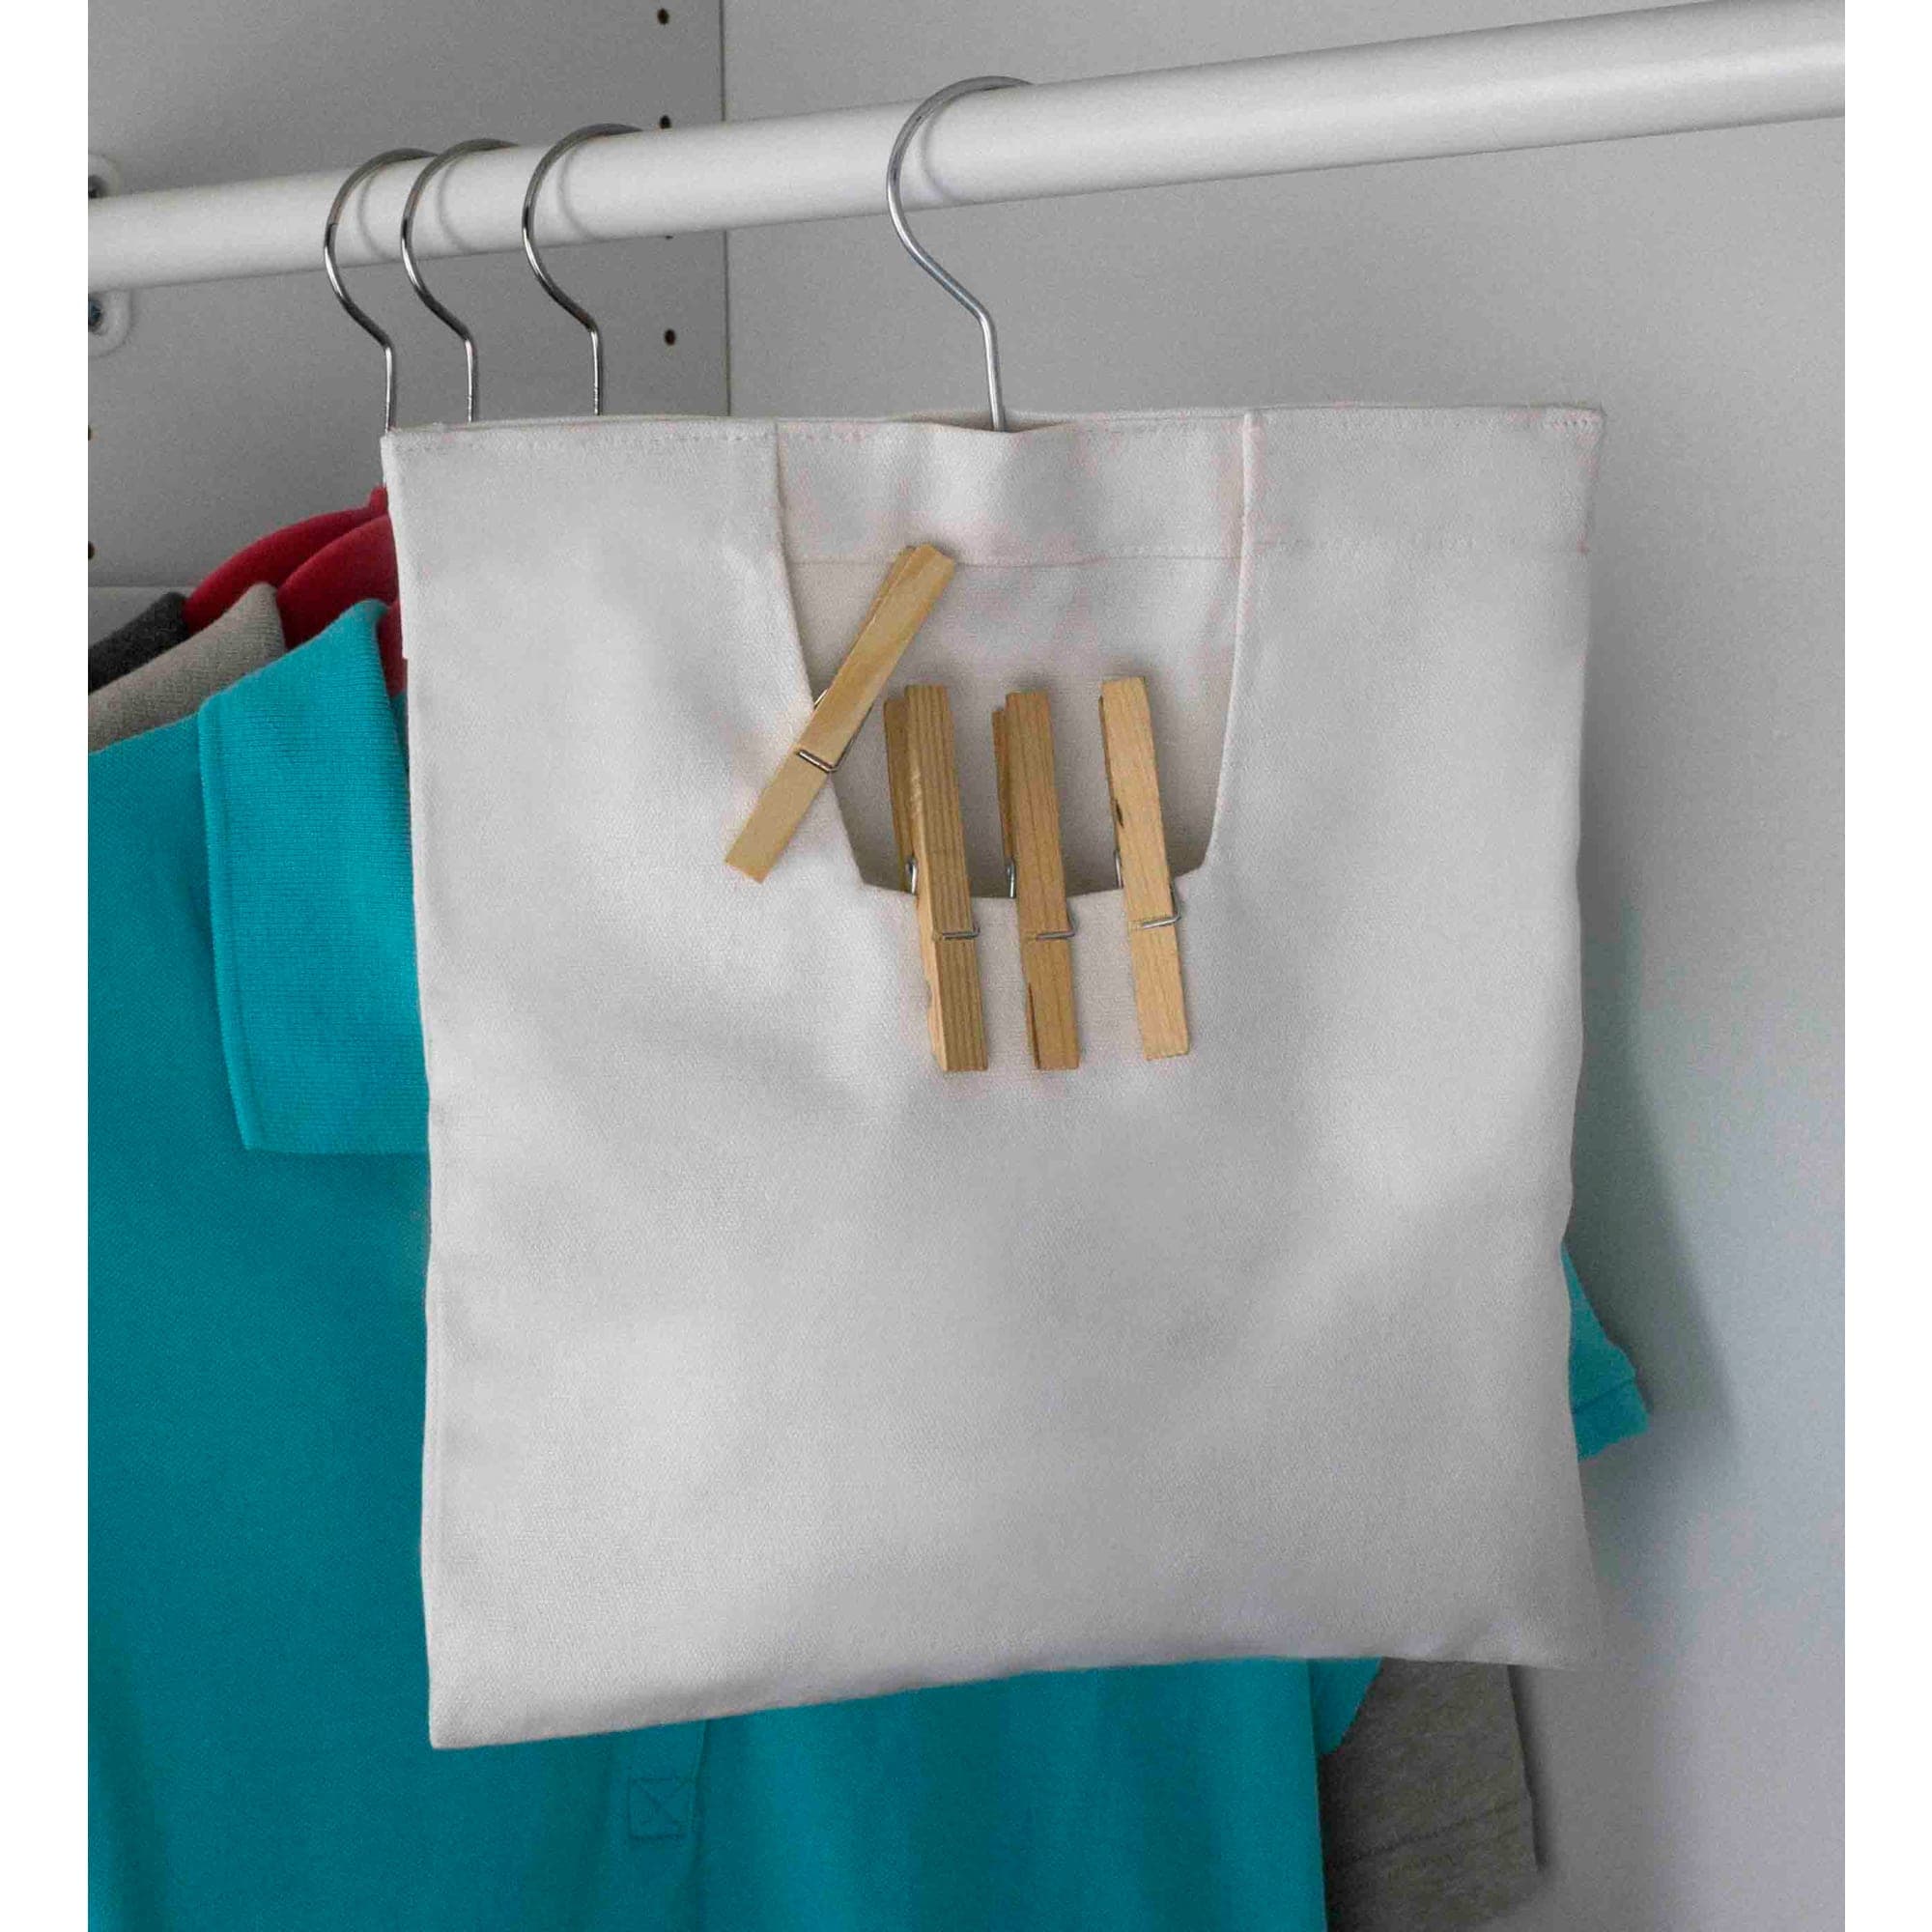 Home Basics Canvas Clothespin Bag with Heavy Duty Steel Hook $4.00 EACH, CASE PACK OF 24